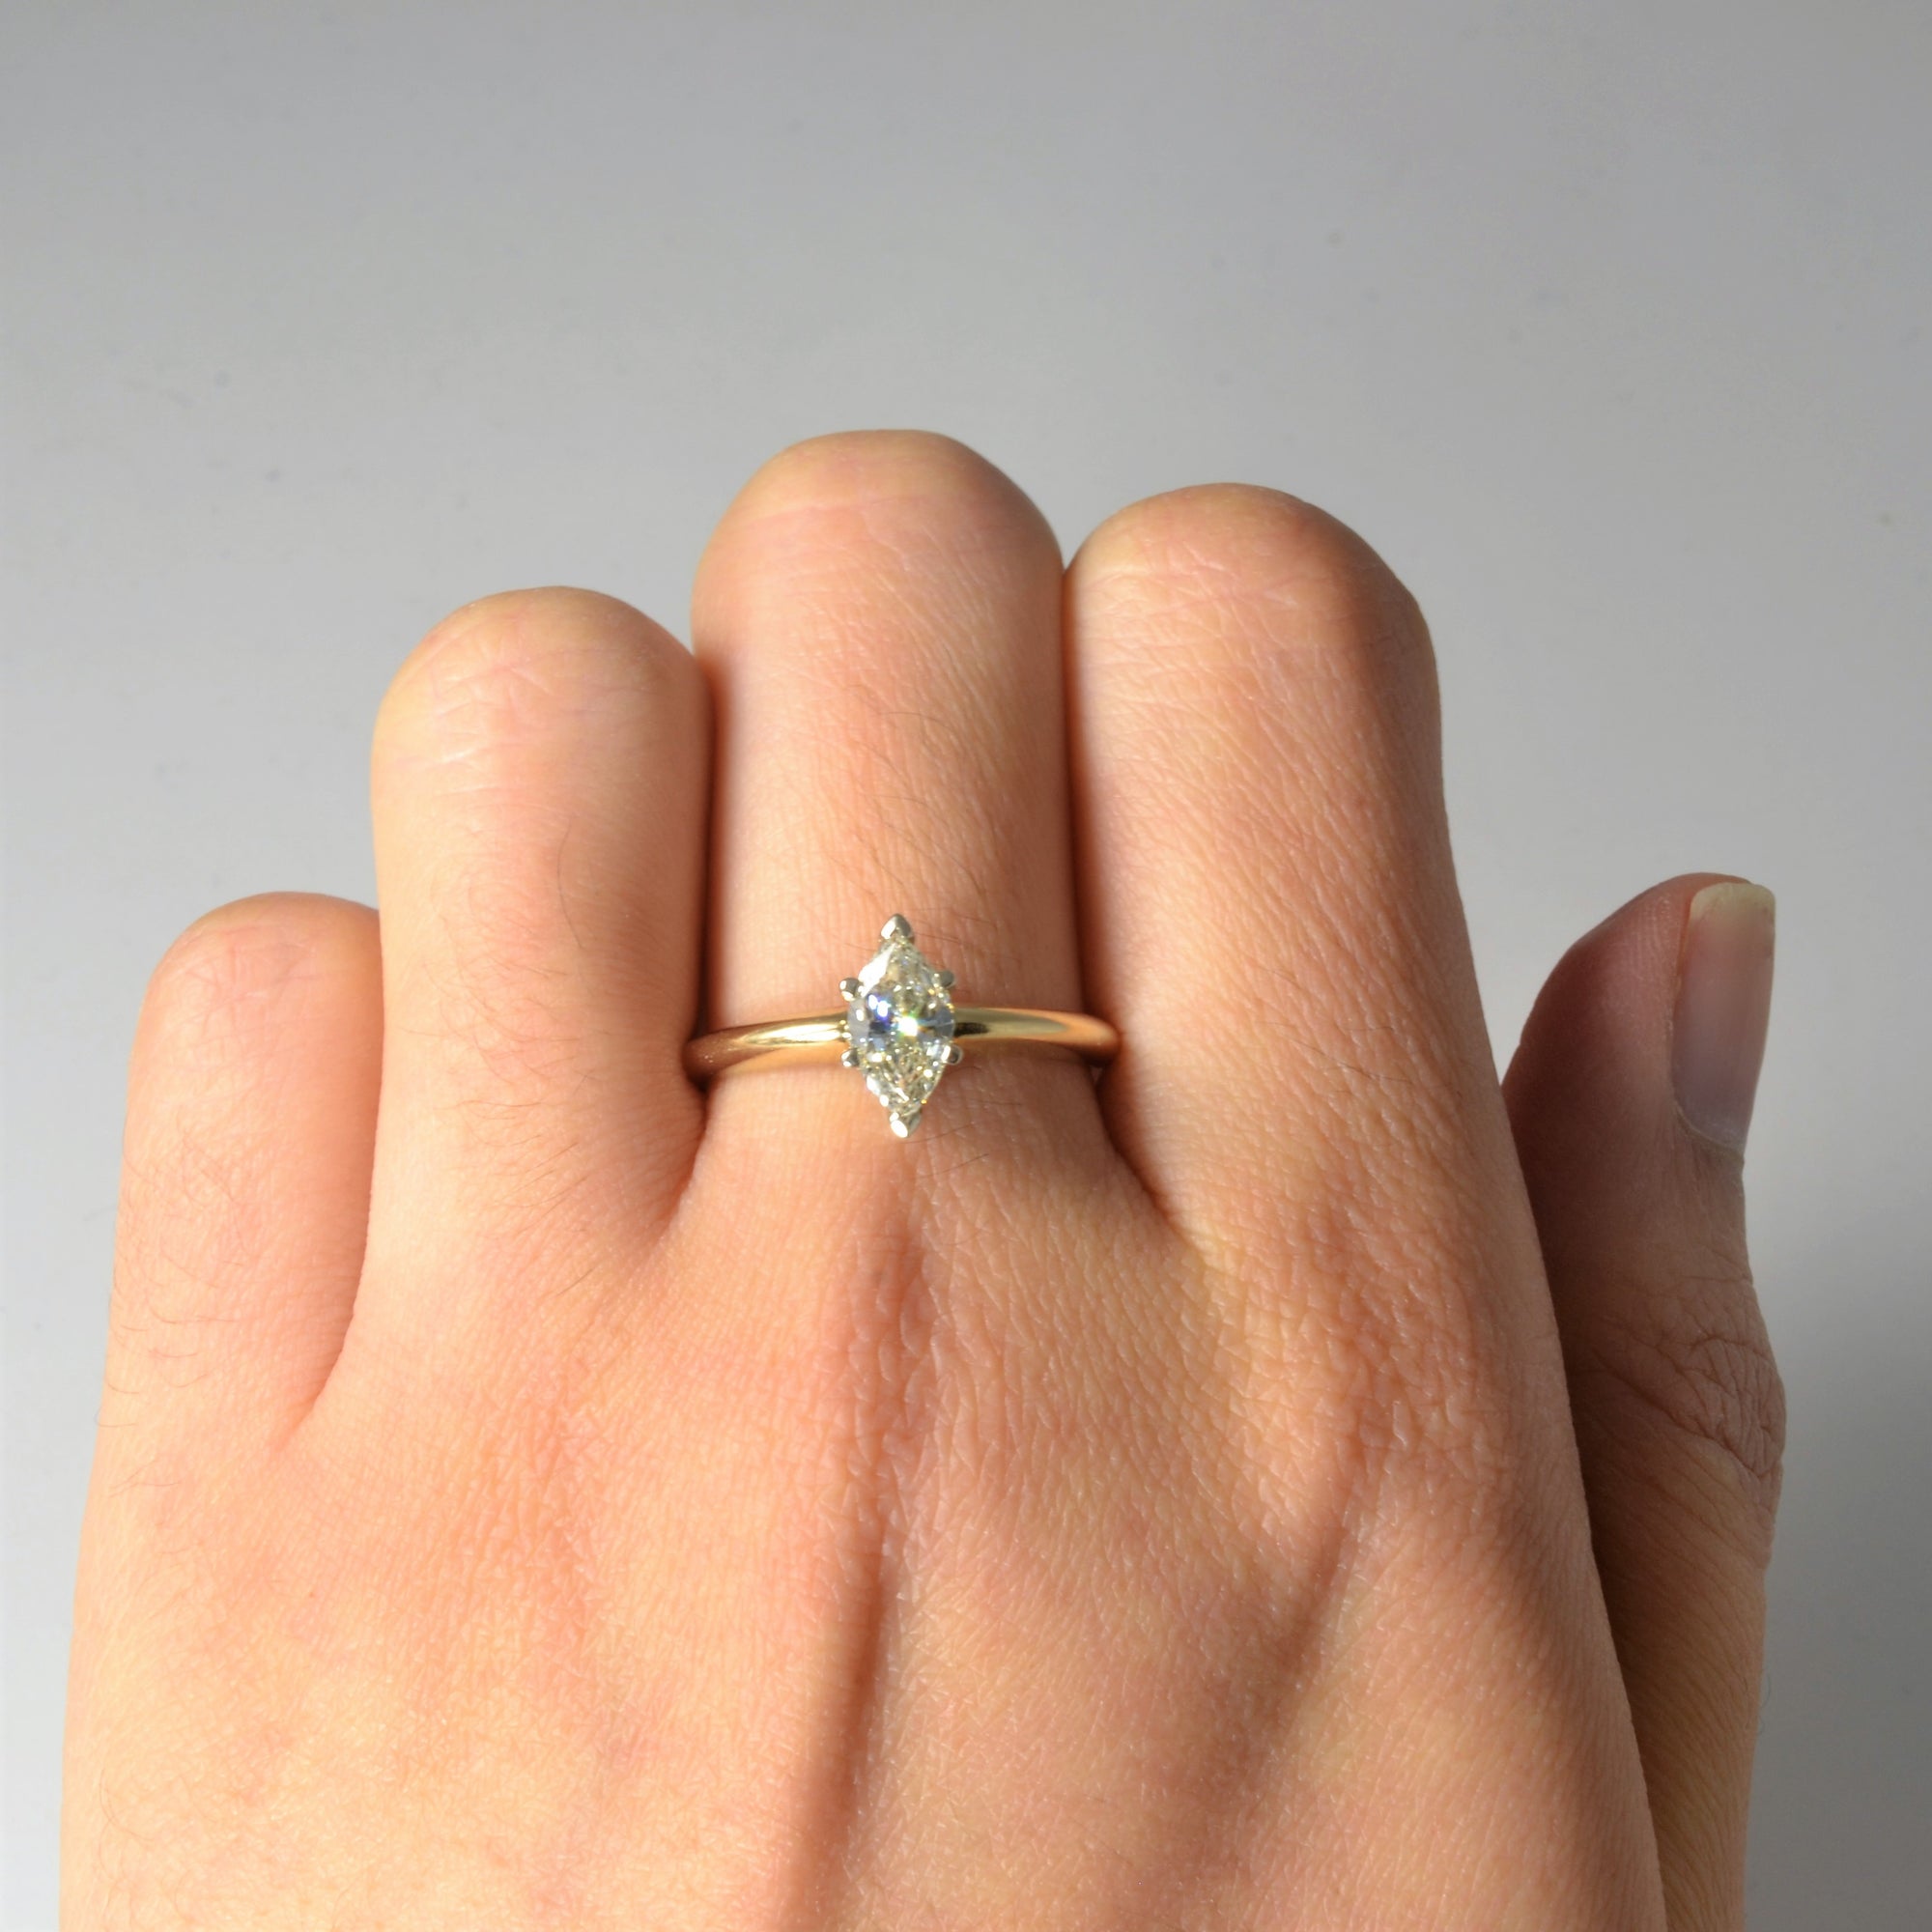 Solitaire Marquise Diamond Engagement Ring | 0.55ct | SZ 8.25 |